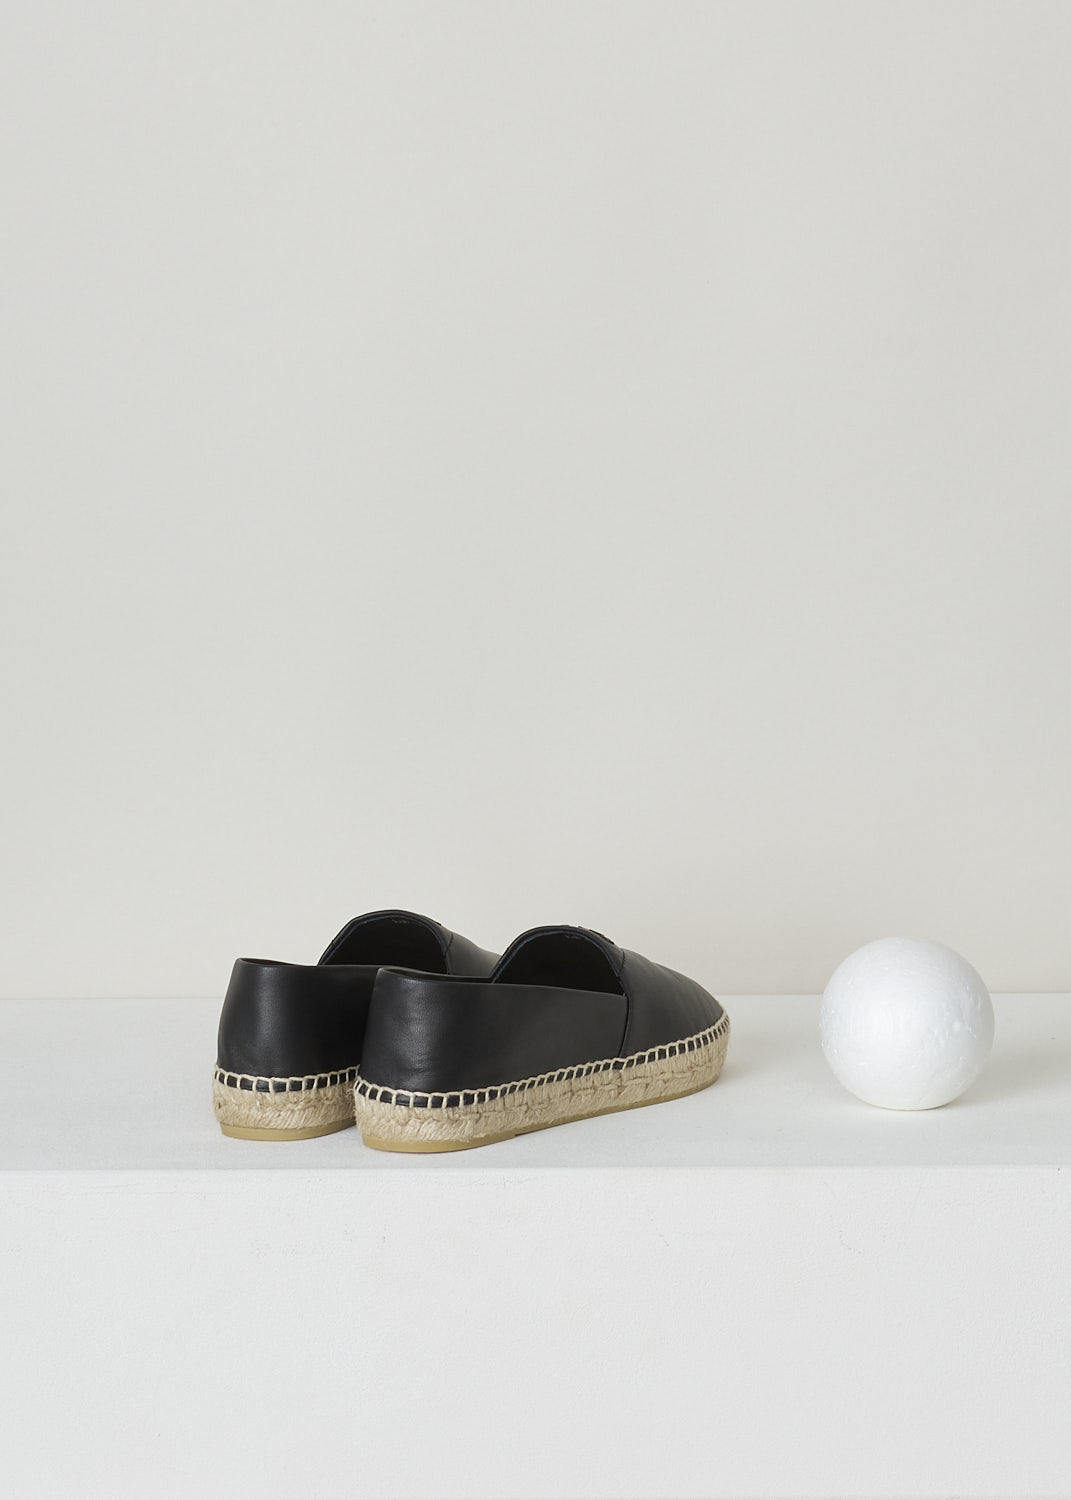 PRADA, BLACK LEATHER ESPADRILLES, NAPPA_1_1S871M_79N_F0002_NERO, Black, Back, These black, soft leather Espadrilles have a round toe that goes over into the braided jute soles. The brand's triangle logo can be found on the vamp.

